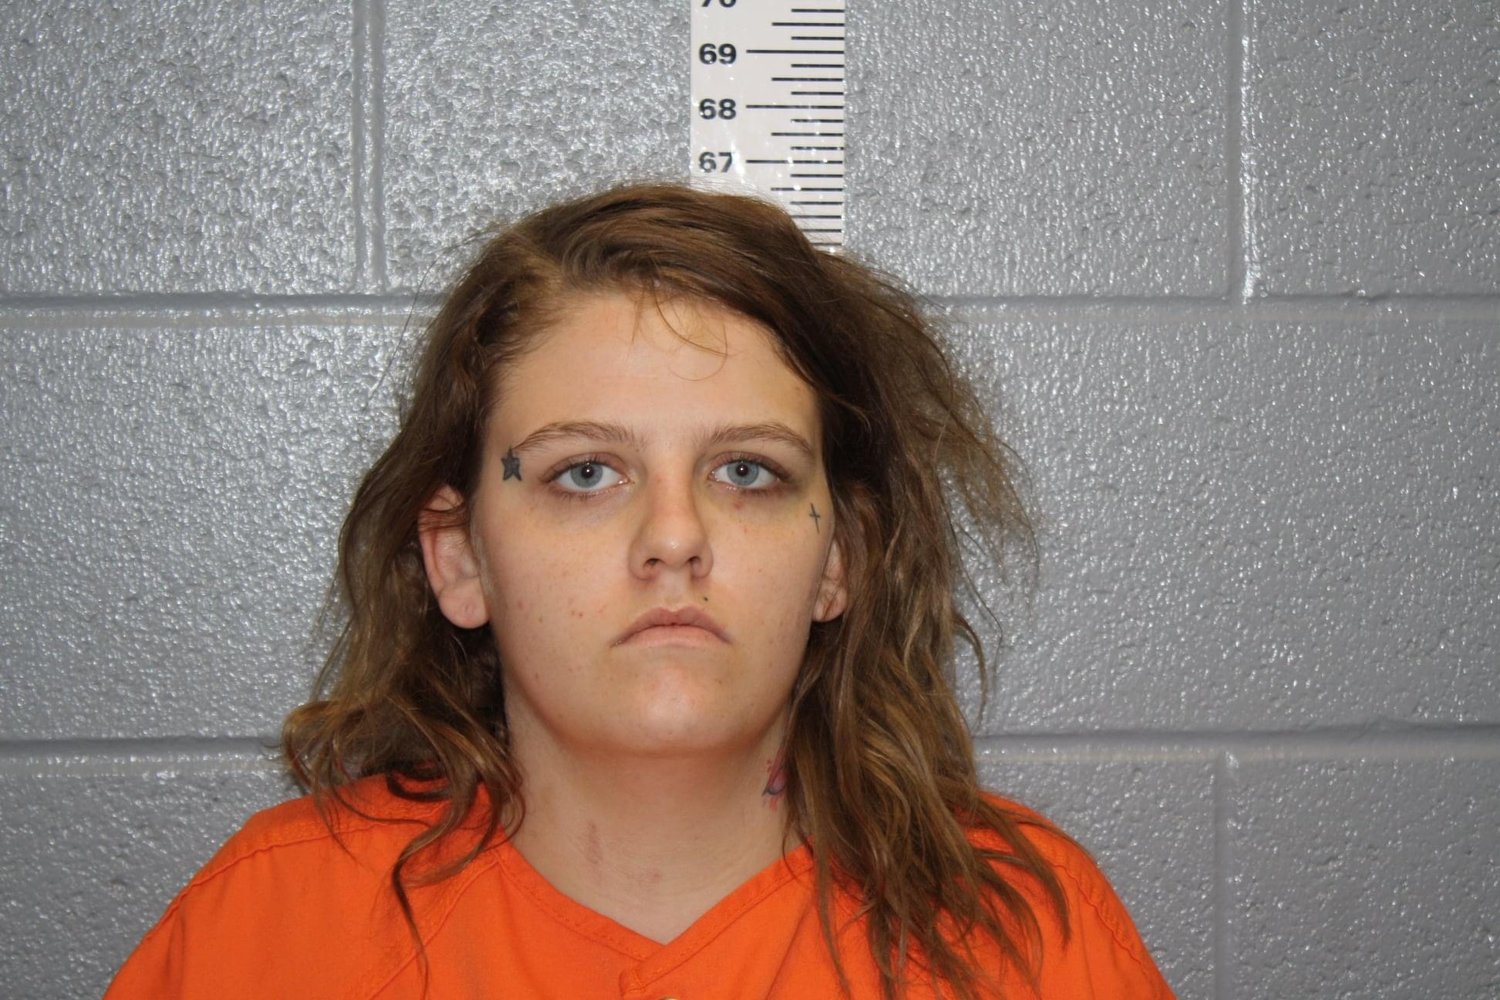 Veronica Roberts of Eldorado Springs booked by Bates County Jail. She is charged with felony second degree assault and felony resisting arrest